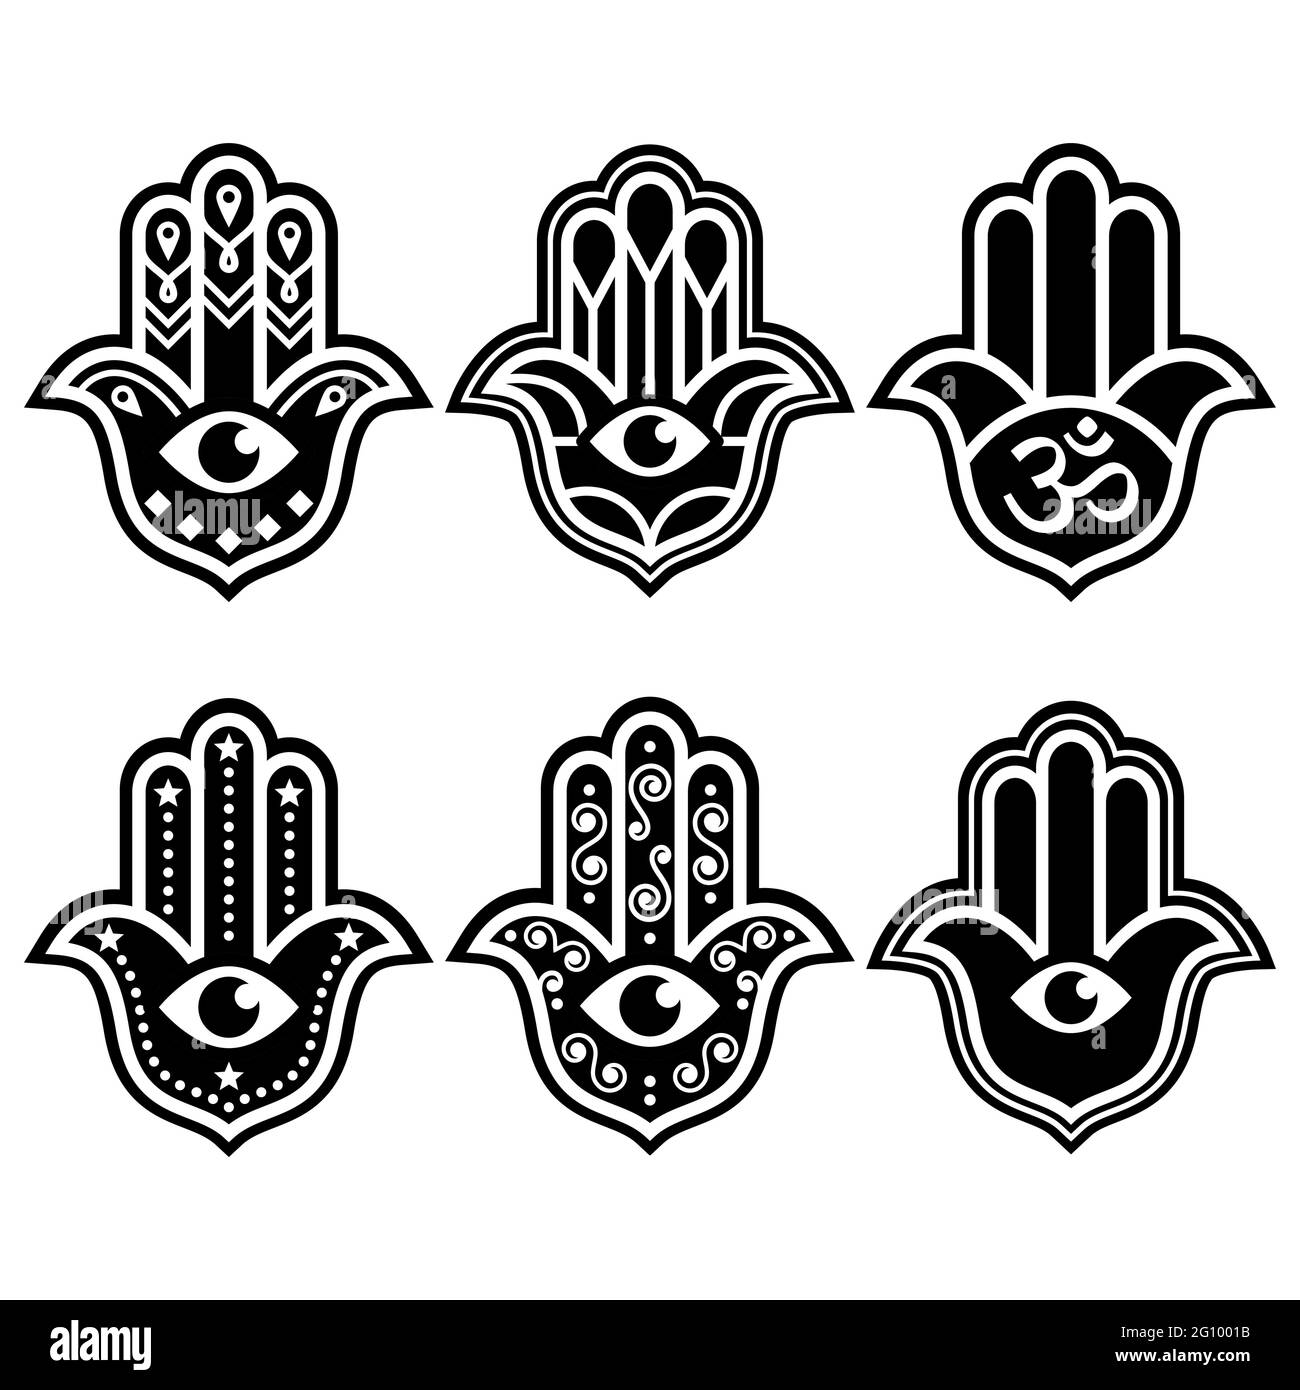 Hamsa hand with evil eye geometric vector design set - symbol of protection, spirituality in white on black background Stock Vector